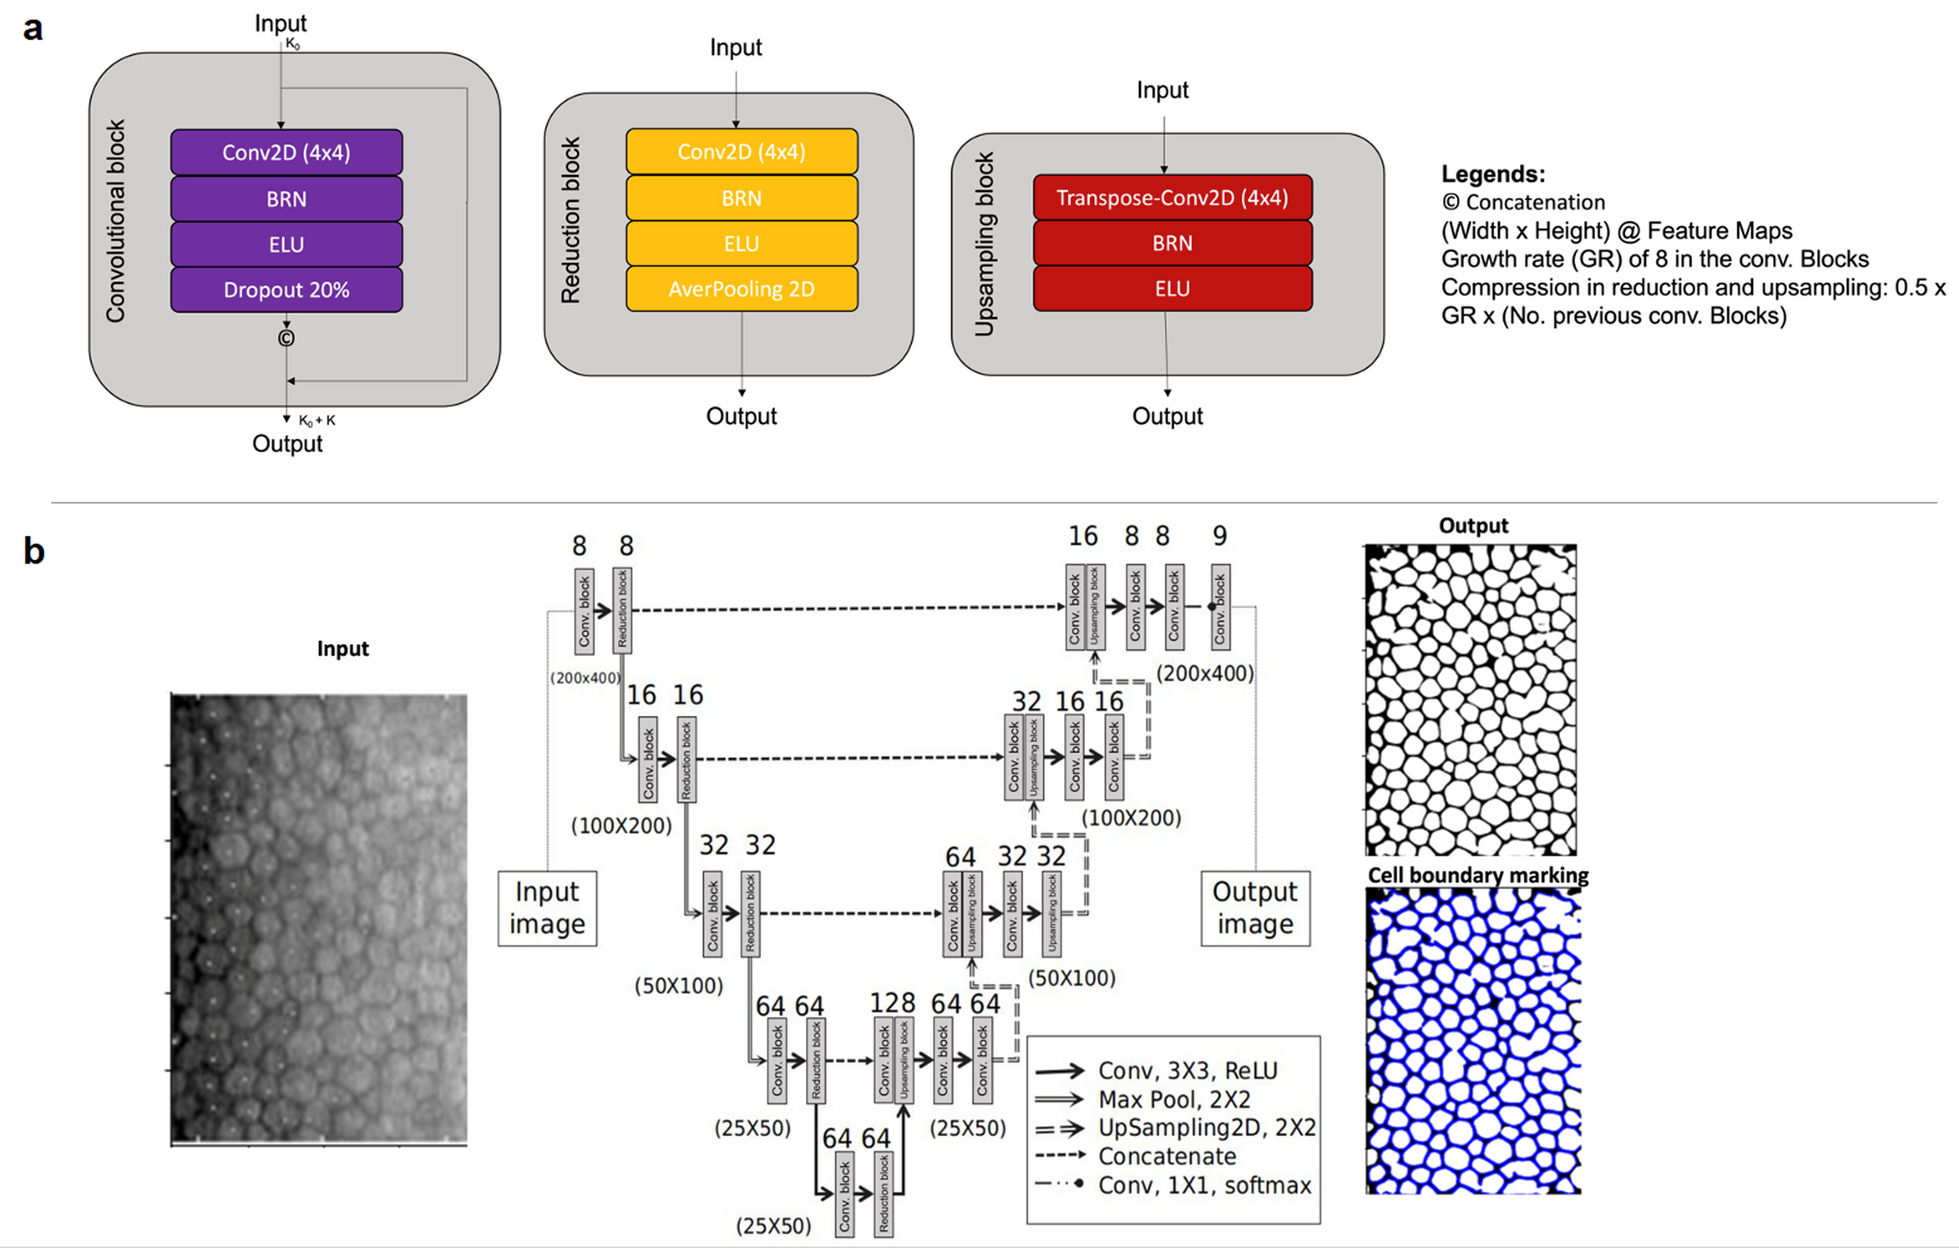 Potential applications of artificial intelligence in image analysis in cornea diseases: a review